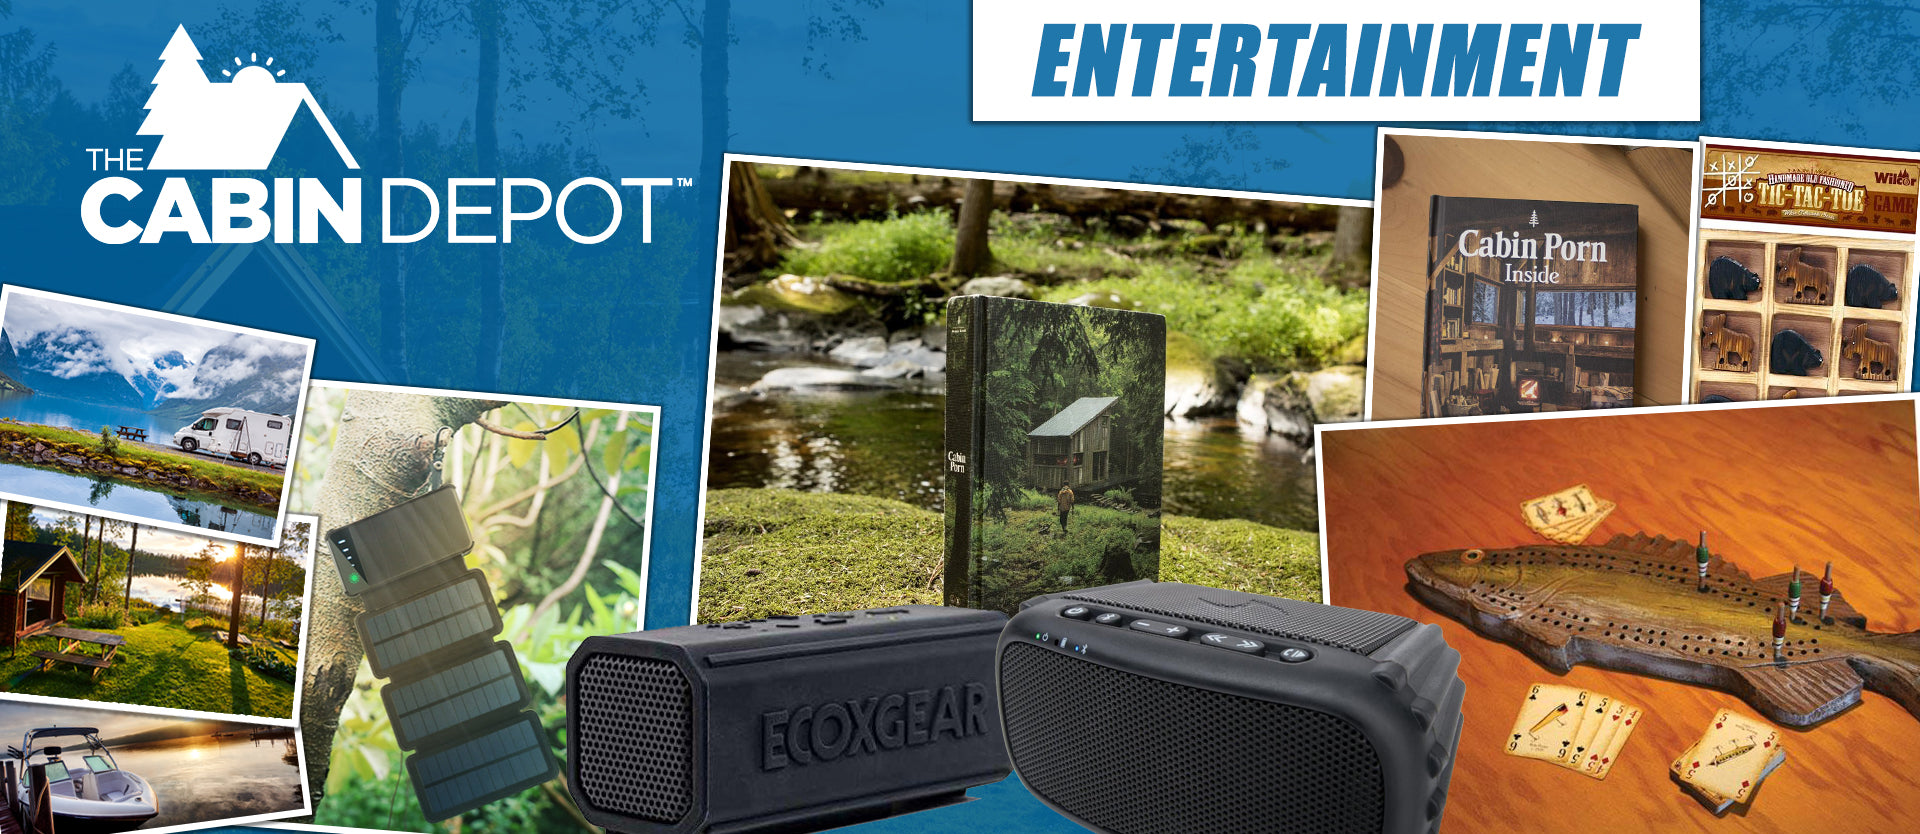 The Cabin Depot ™ Entertainment Canada Bluetooth Speakers Games